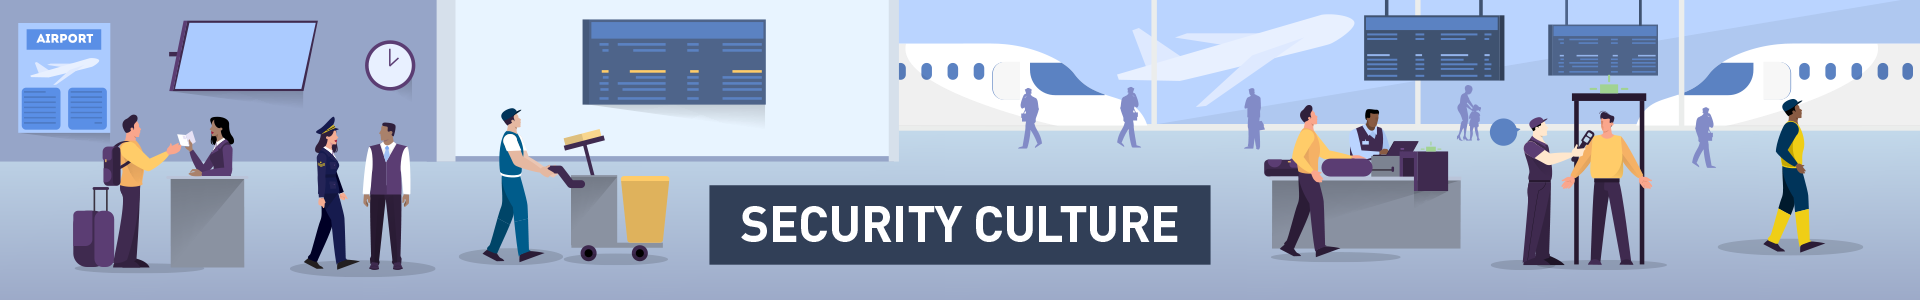 ICAO Security Culture new Web Banner.png